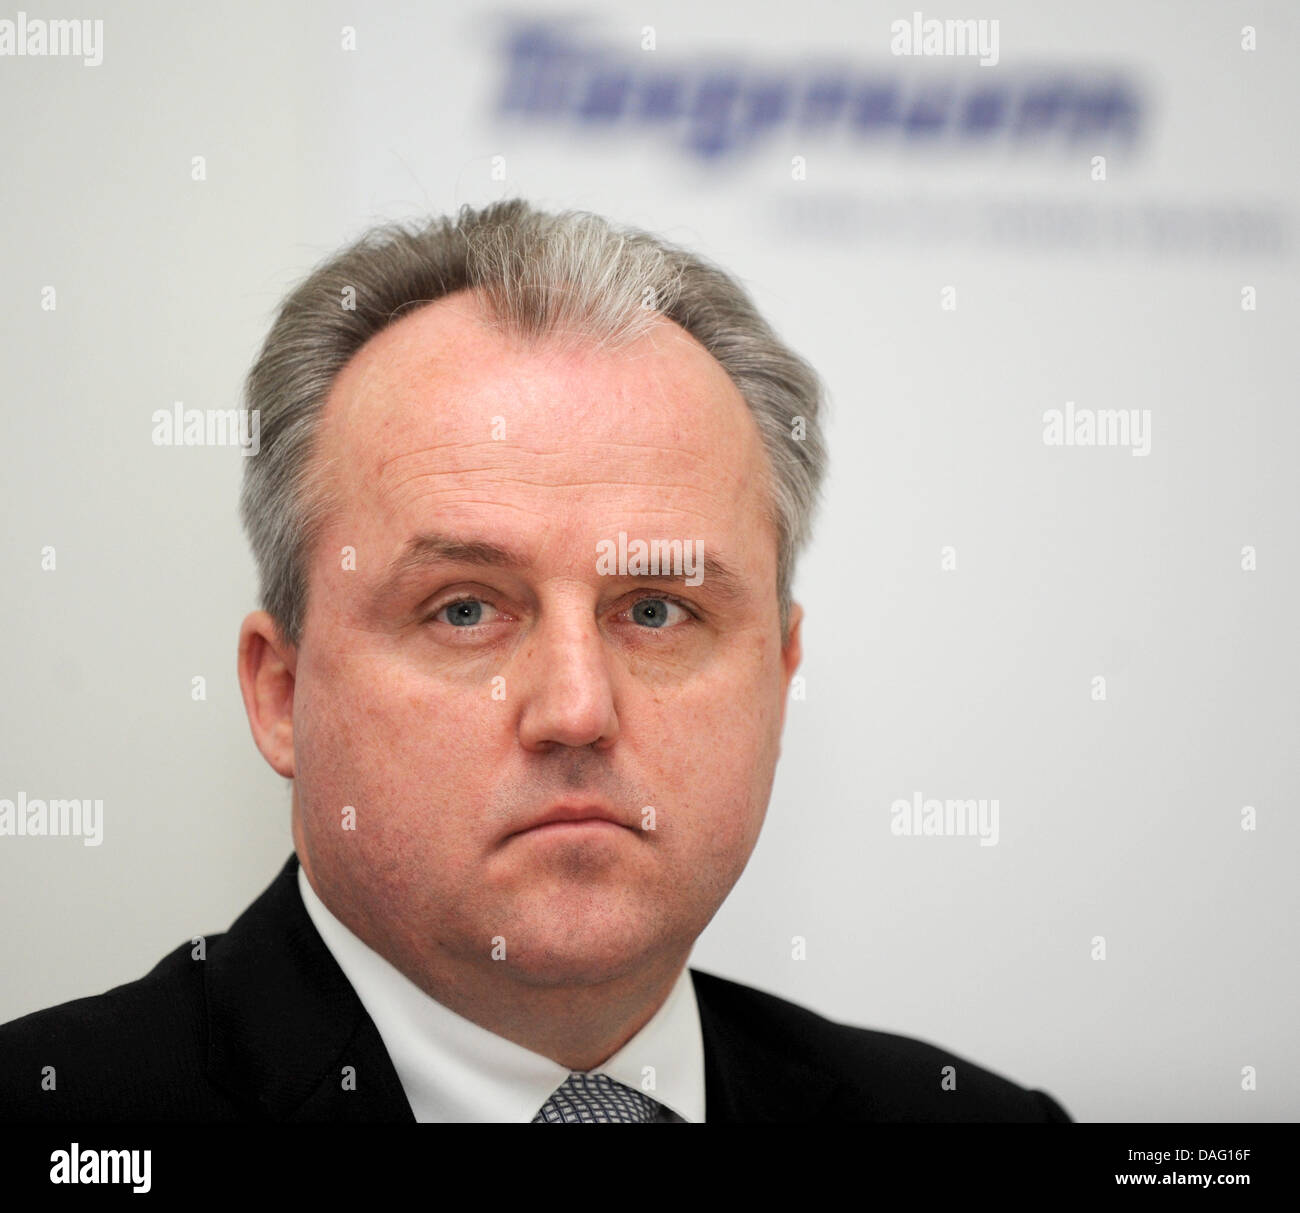 CFO of the mechanical engineering company Tognum, Joachim Coers, is pictured during a press briefing on annual results in Stuttgart, Germany, 10 March 2011. - cfo-of-the-mechanical-engineering-company-tognum-joachim-coers-is-DAG16F